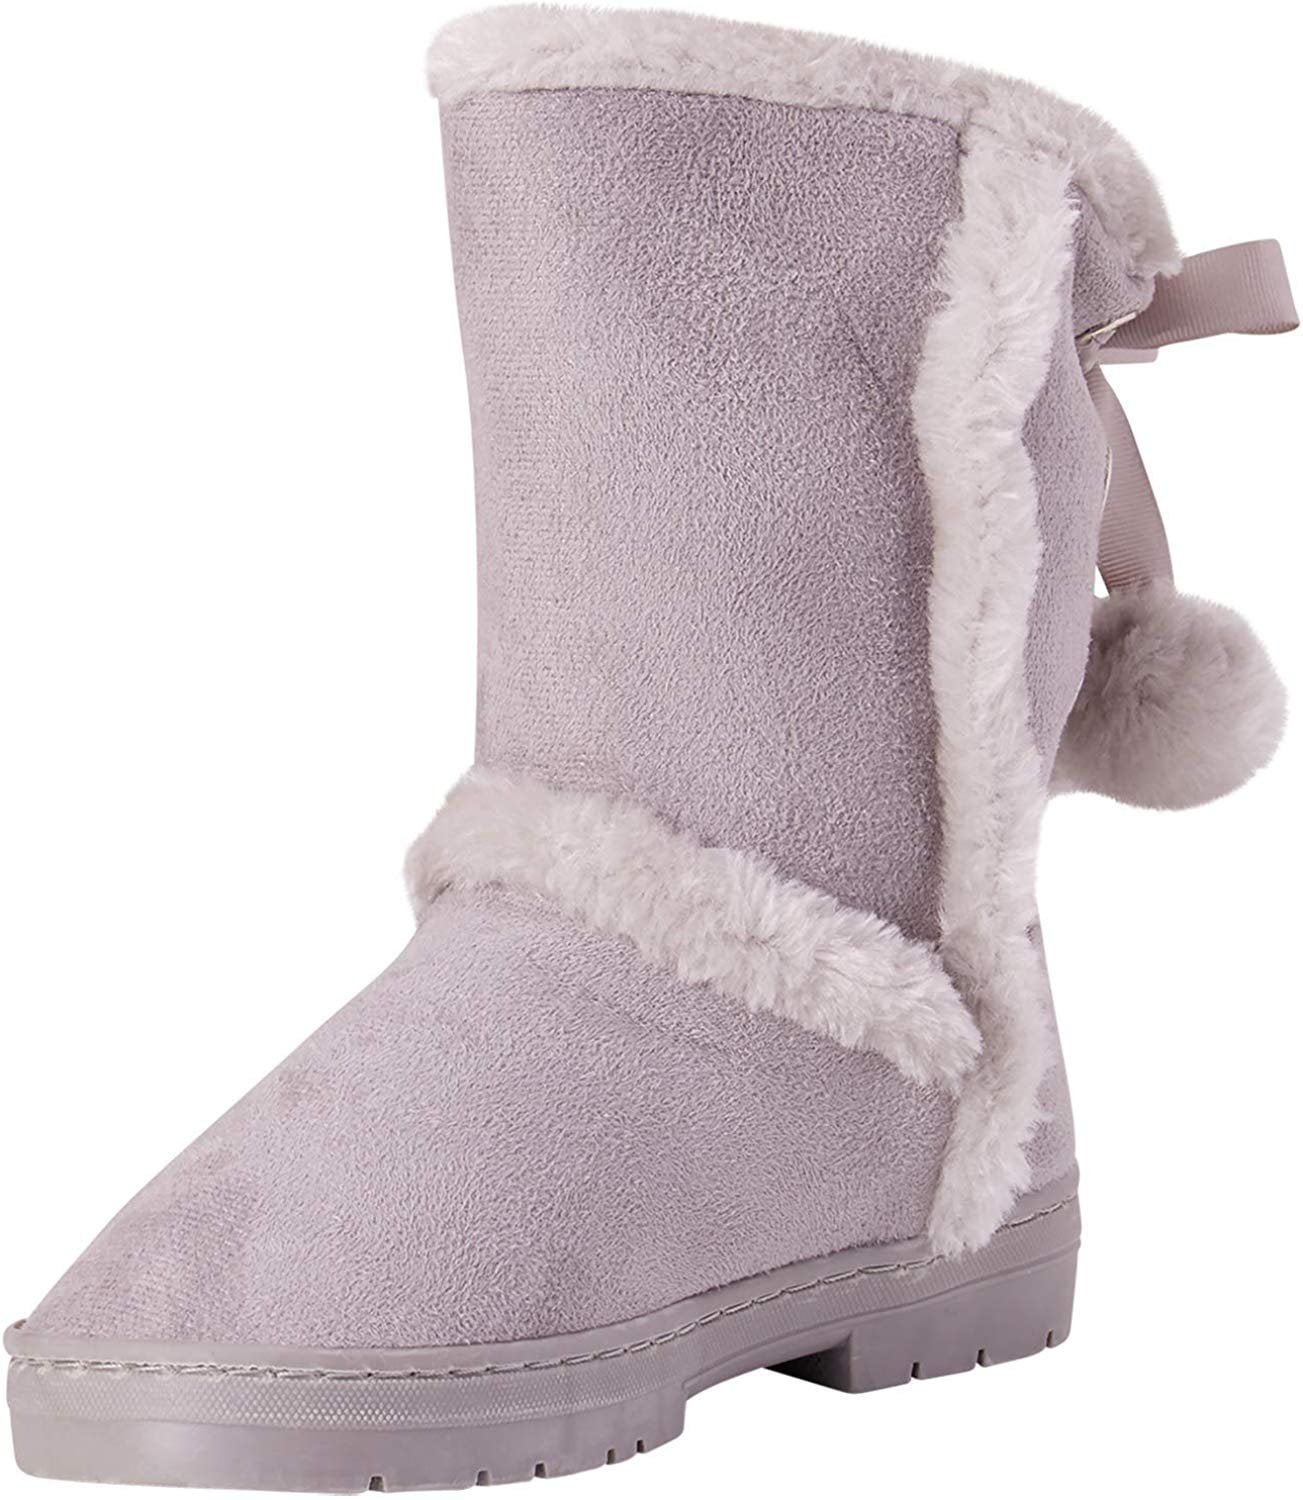 girls boots with pom poms